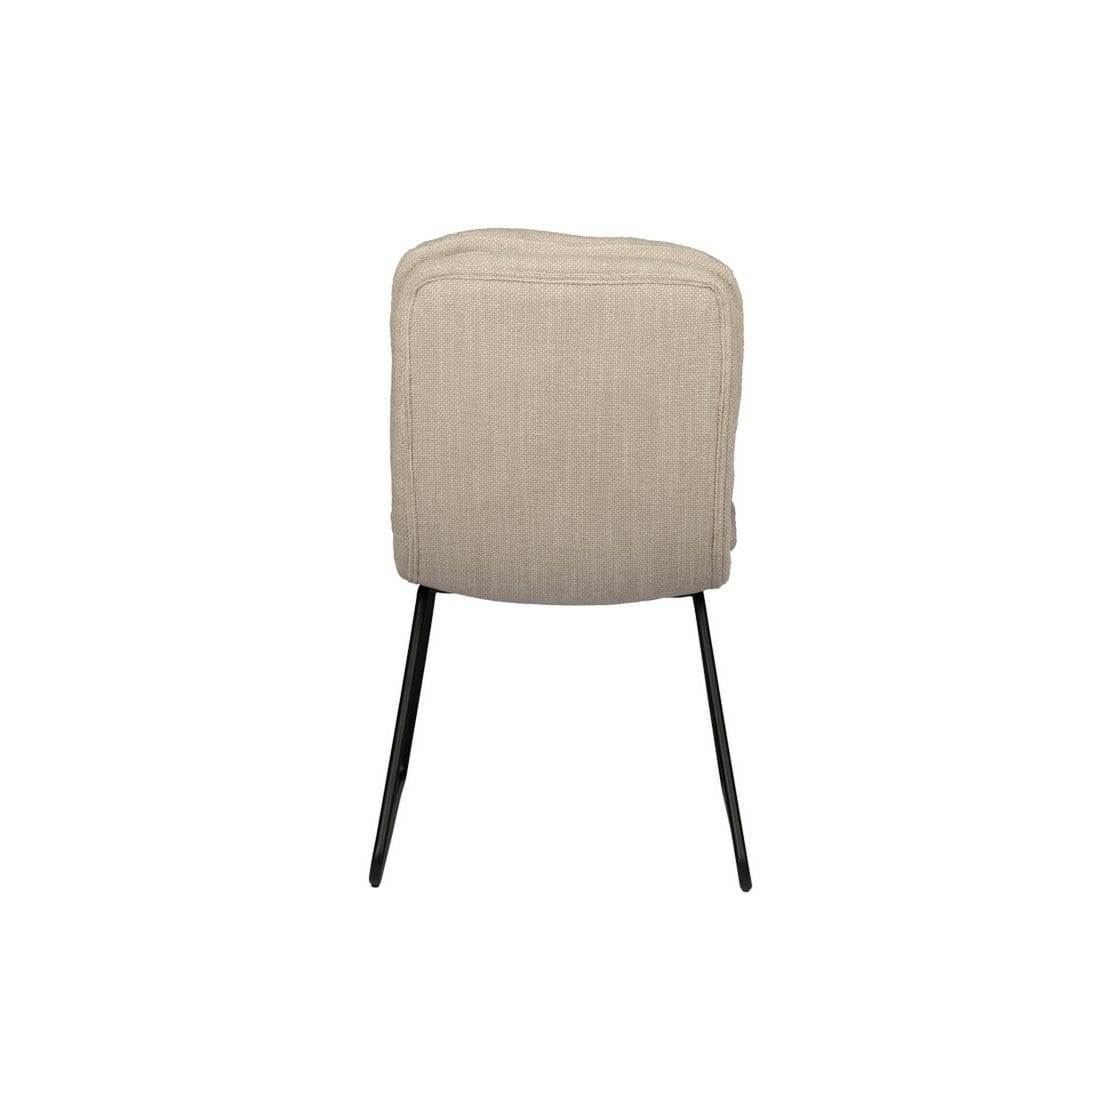 Pole To Pole Beluga chair Beige (Set of 2)